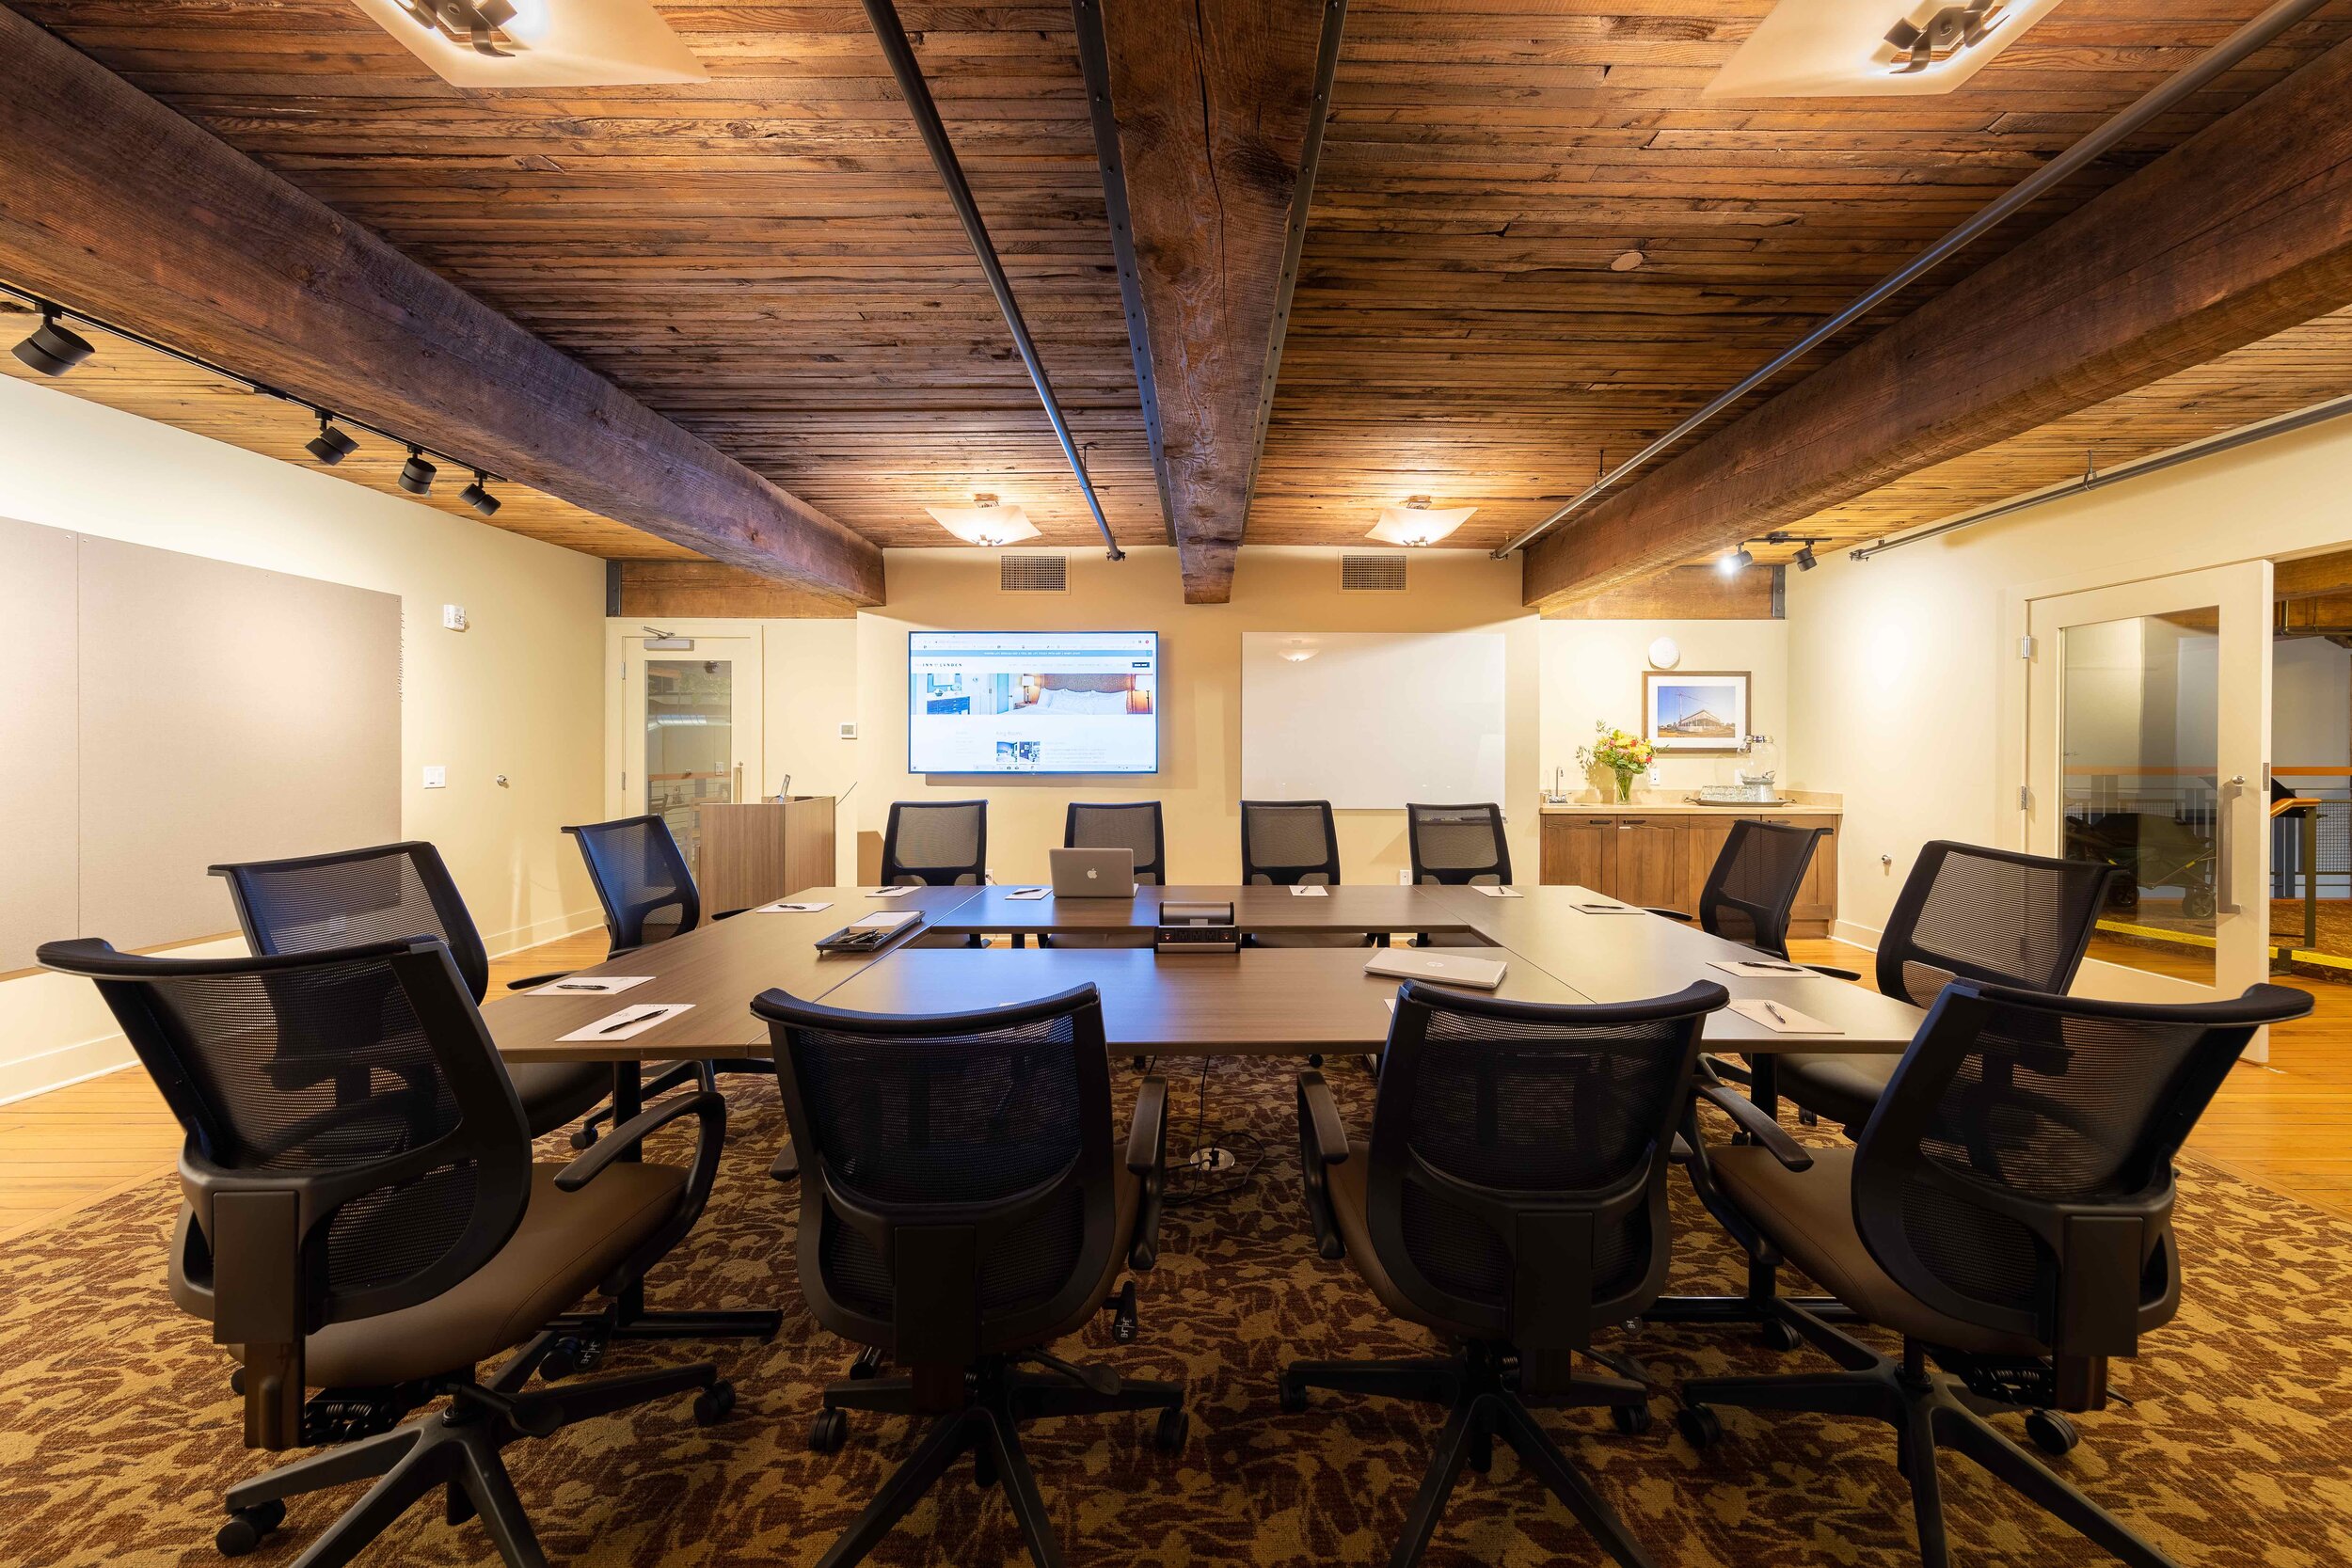 Waples Room for meetings and events.